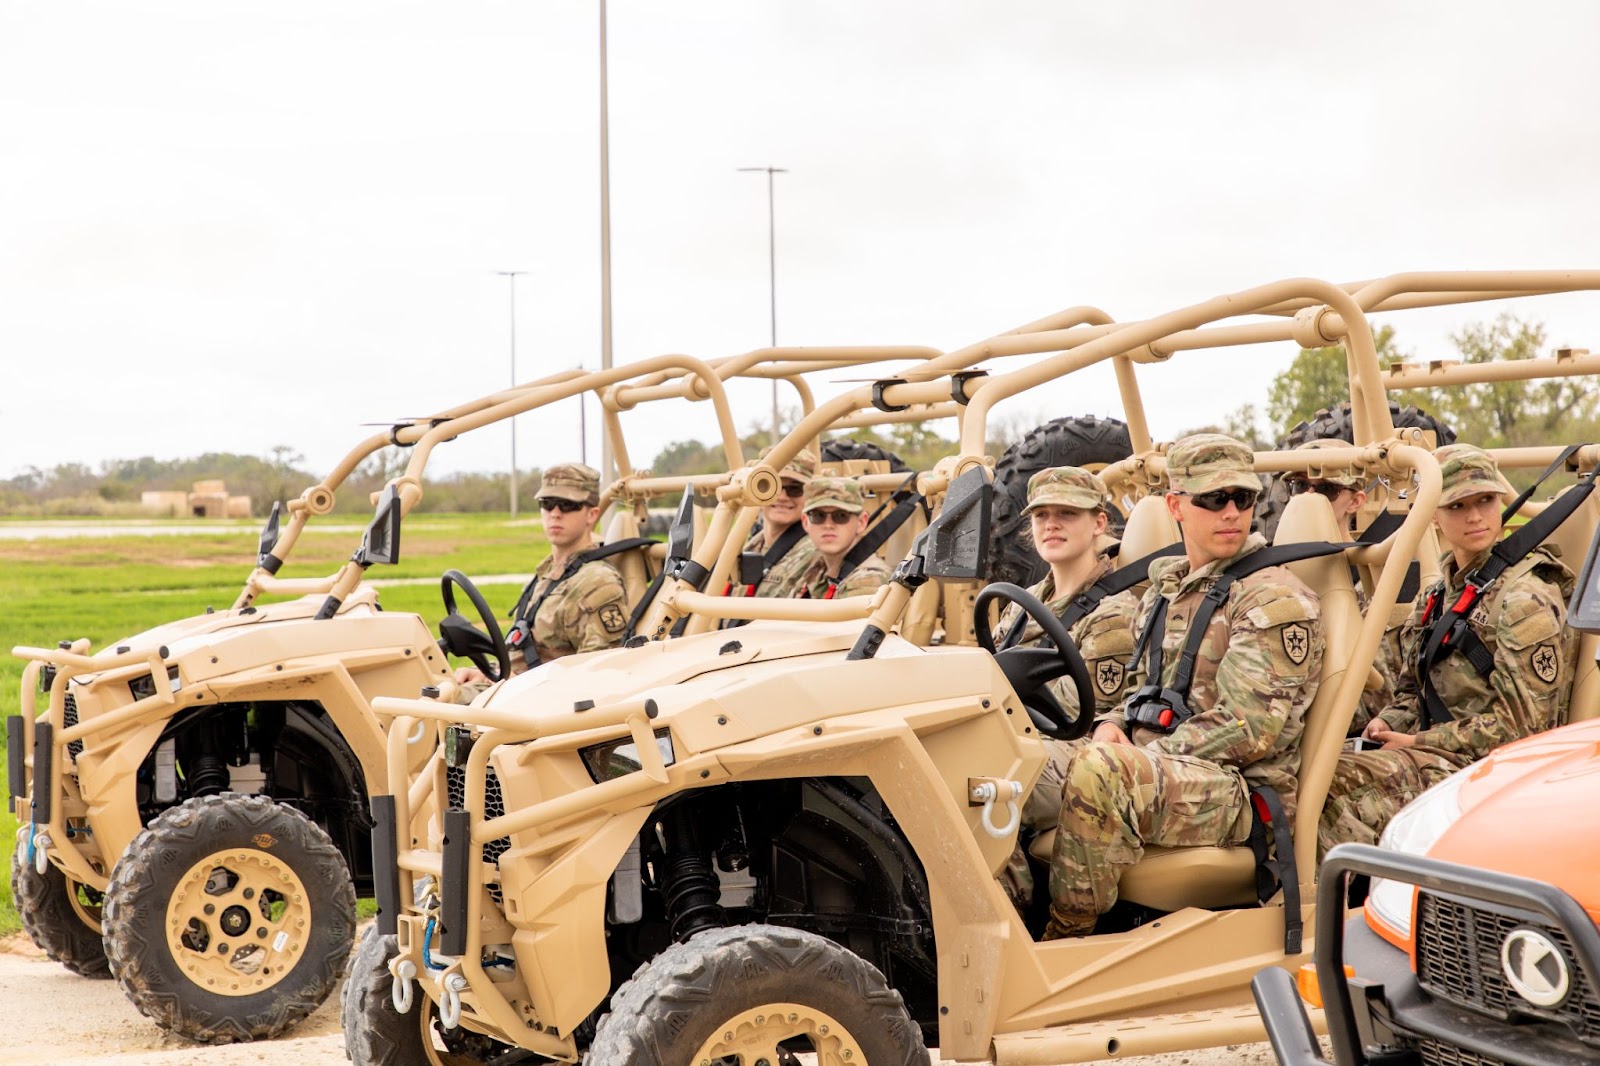 Cadets use off road vehicles to tour the BCDC's Innovation Proving Ground facility.